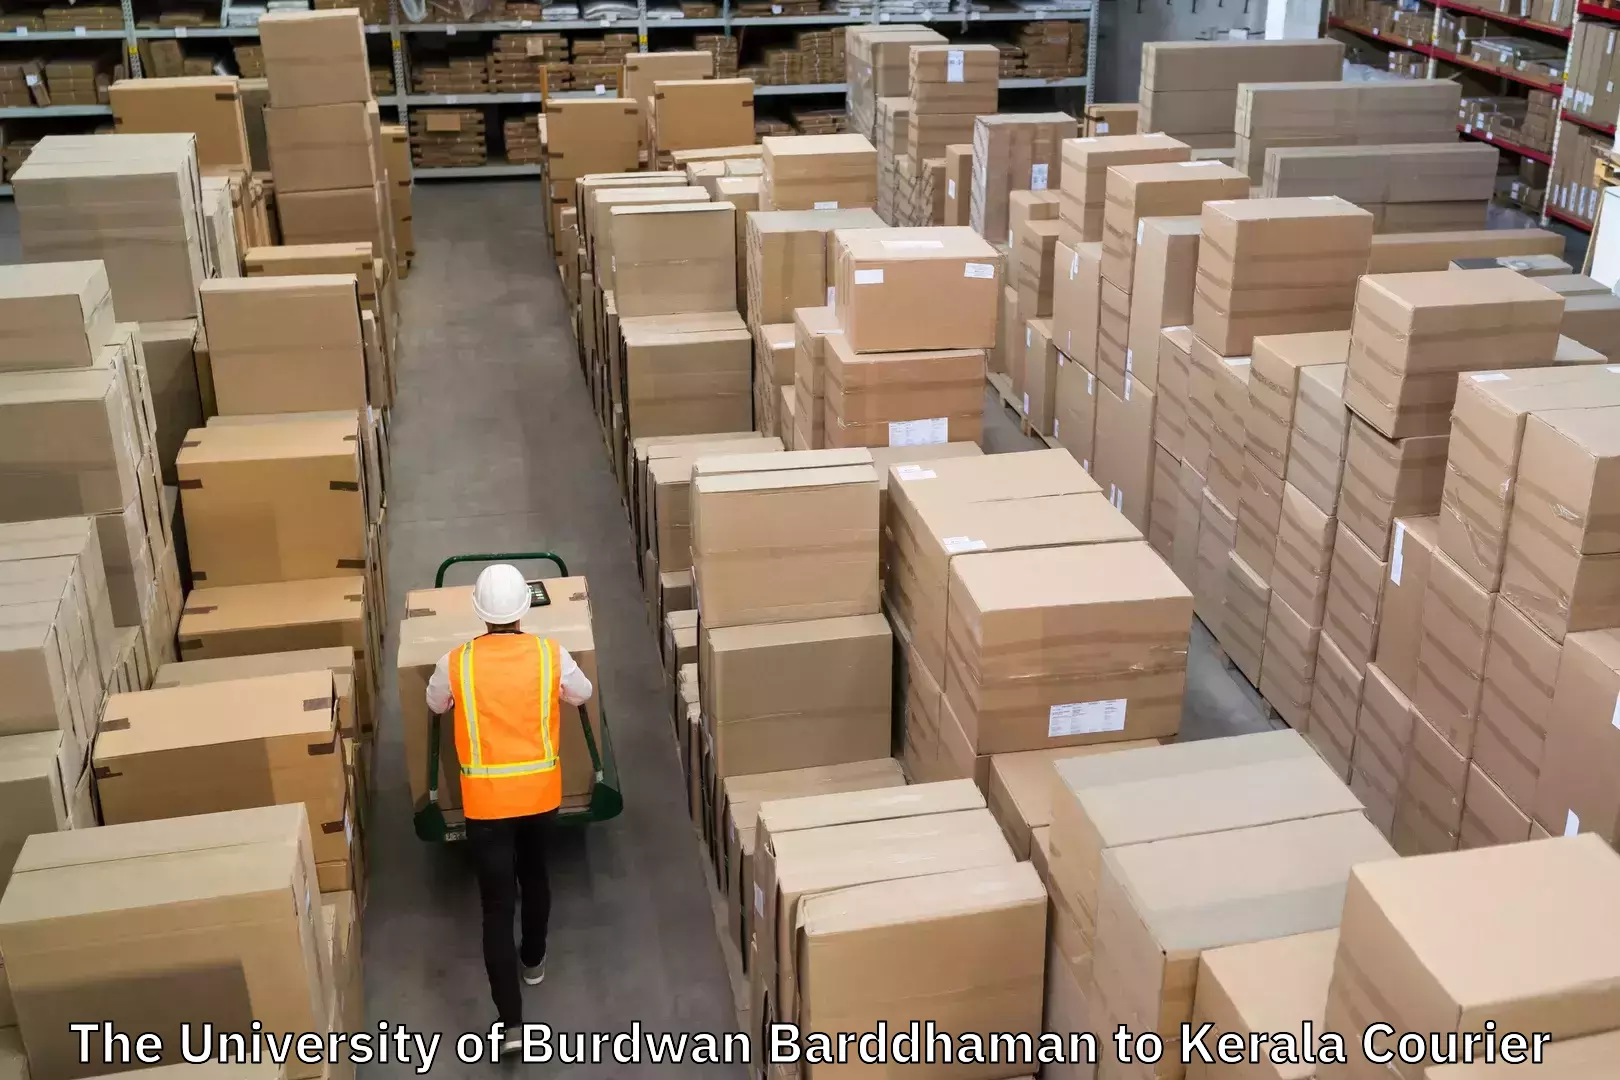 Overnight delivery services The University of Burdwan Barddhaman to Kerala